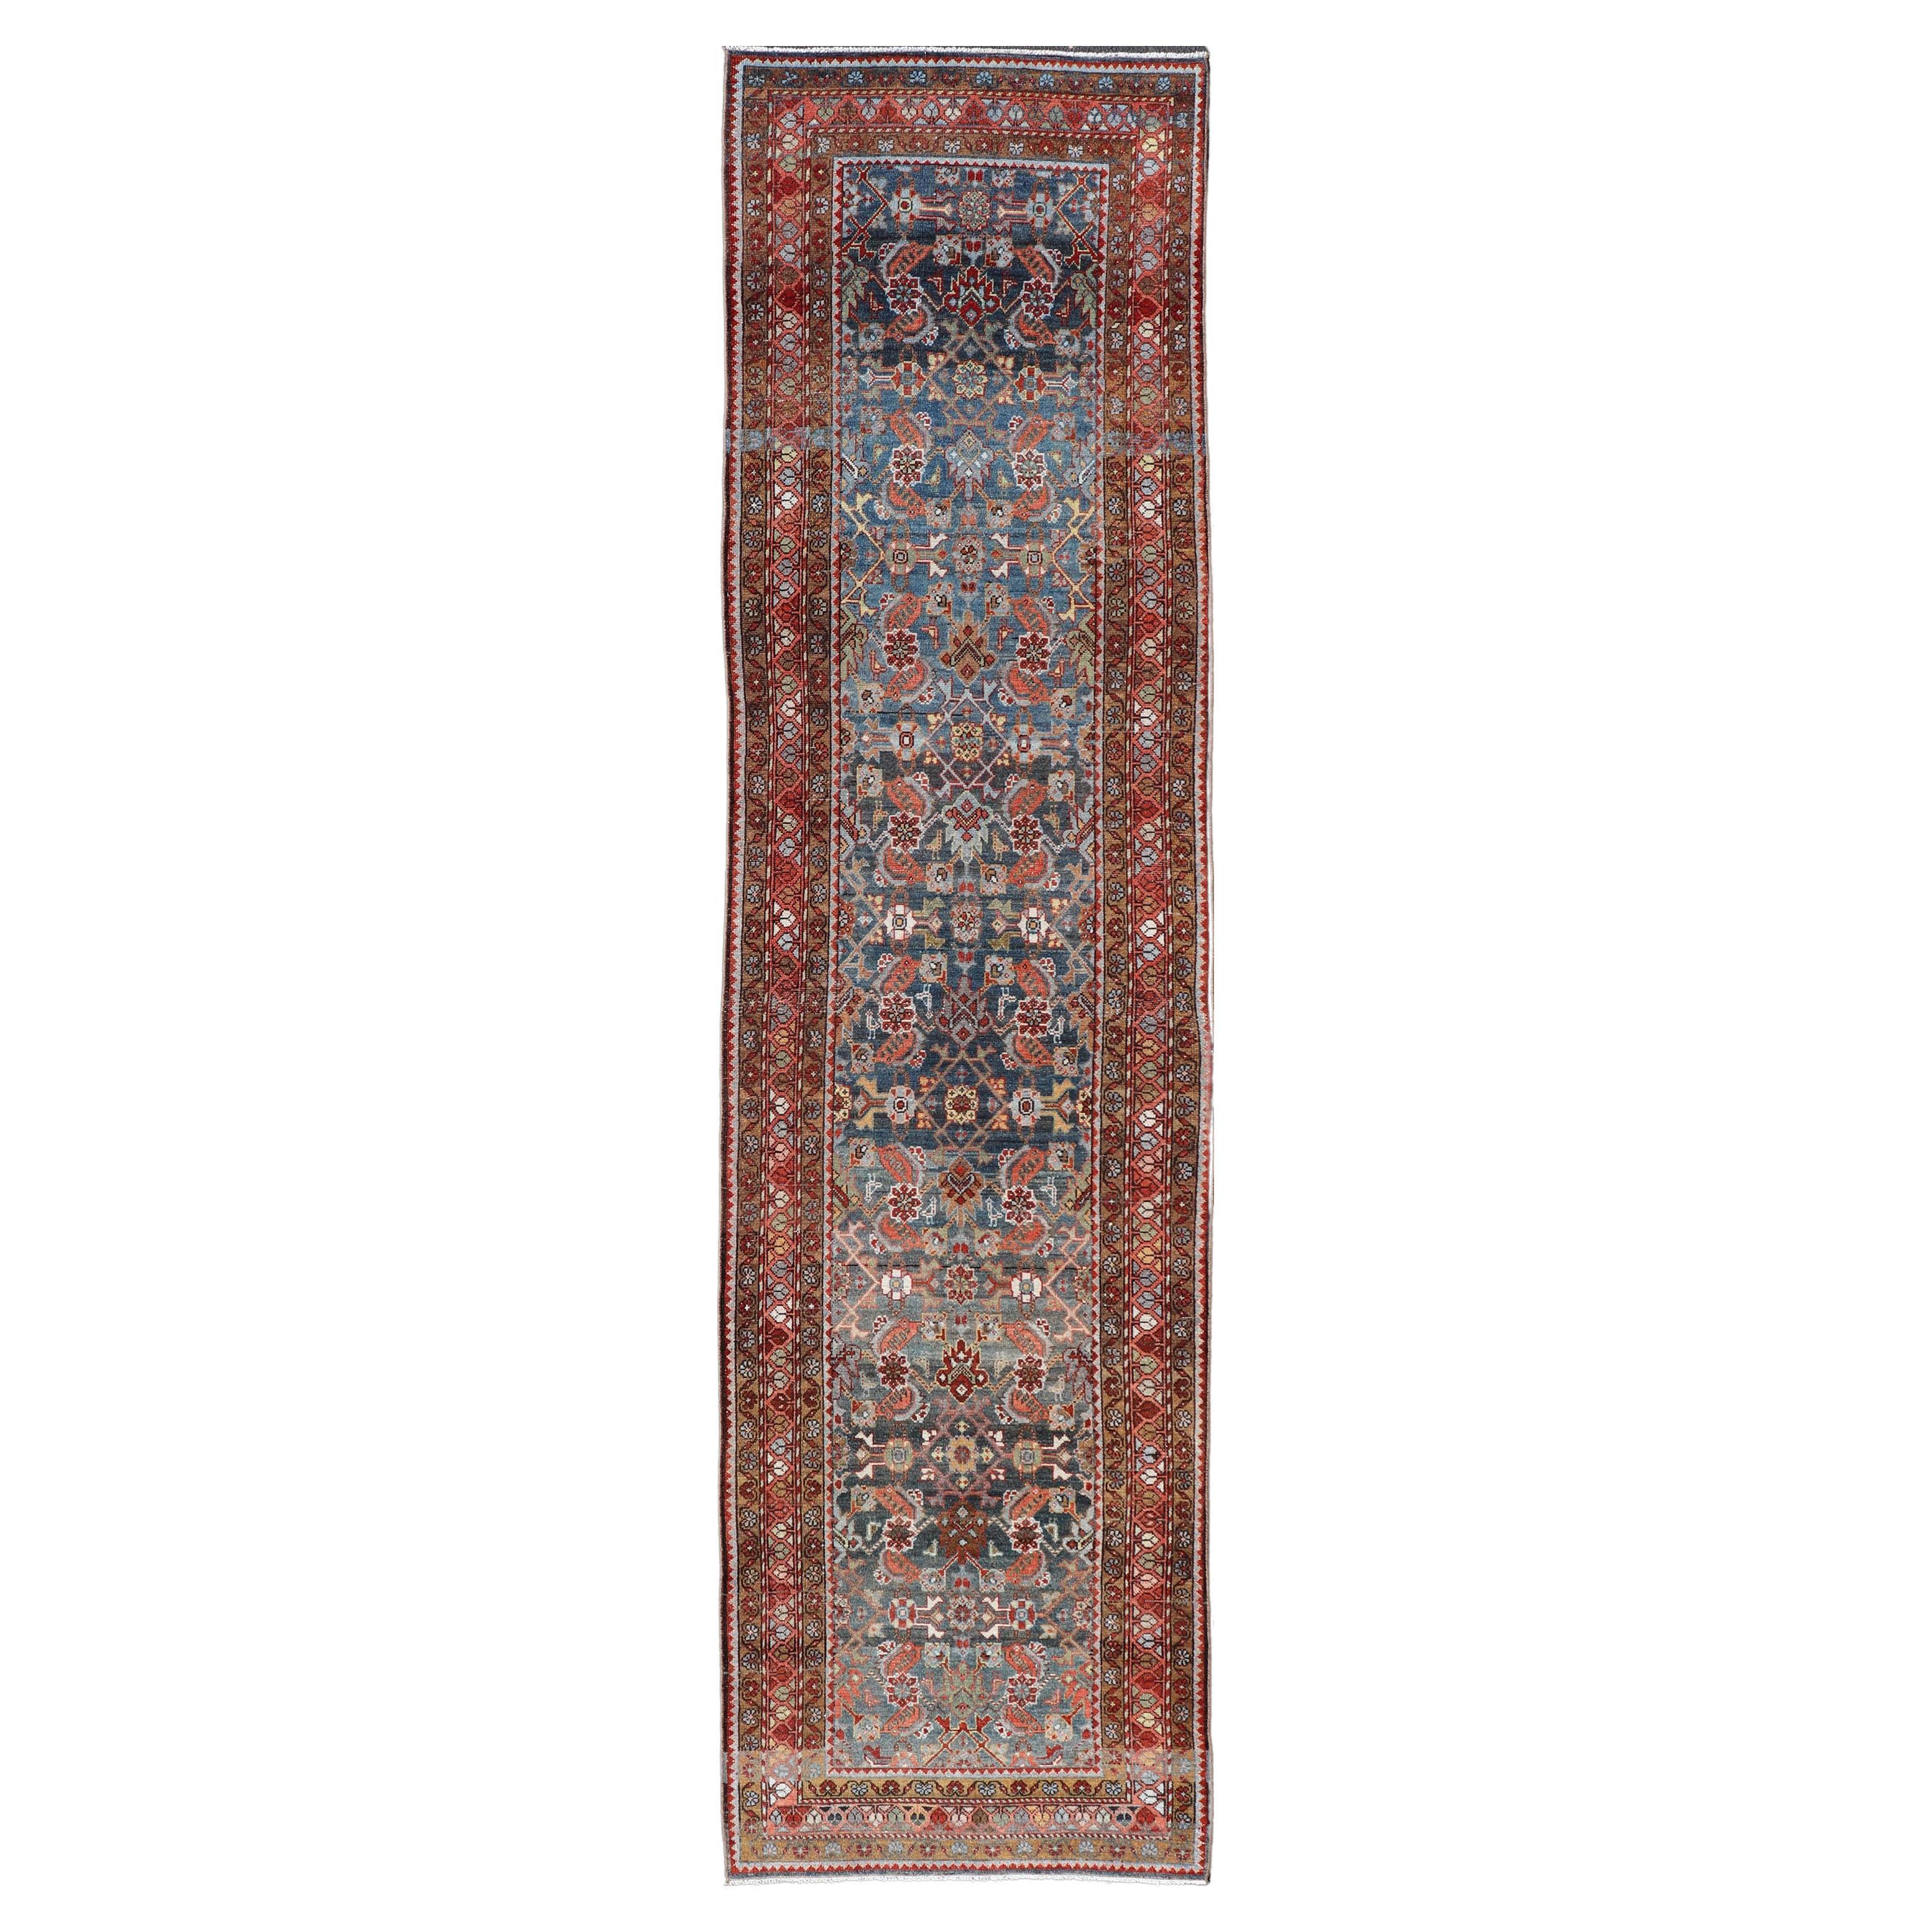 N.W. Persian Antique Runner with Geometric Florals Set on a Blue Field